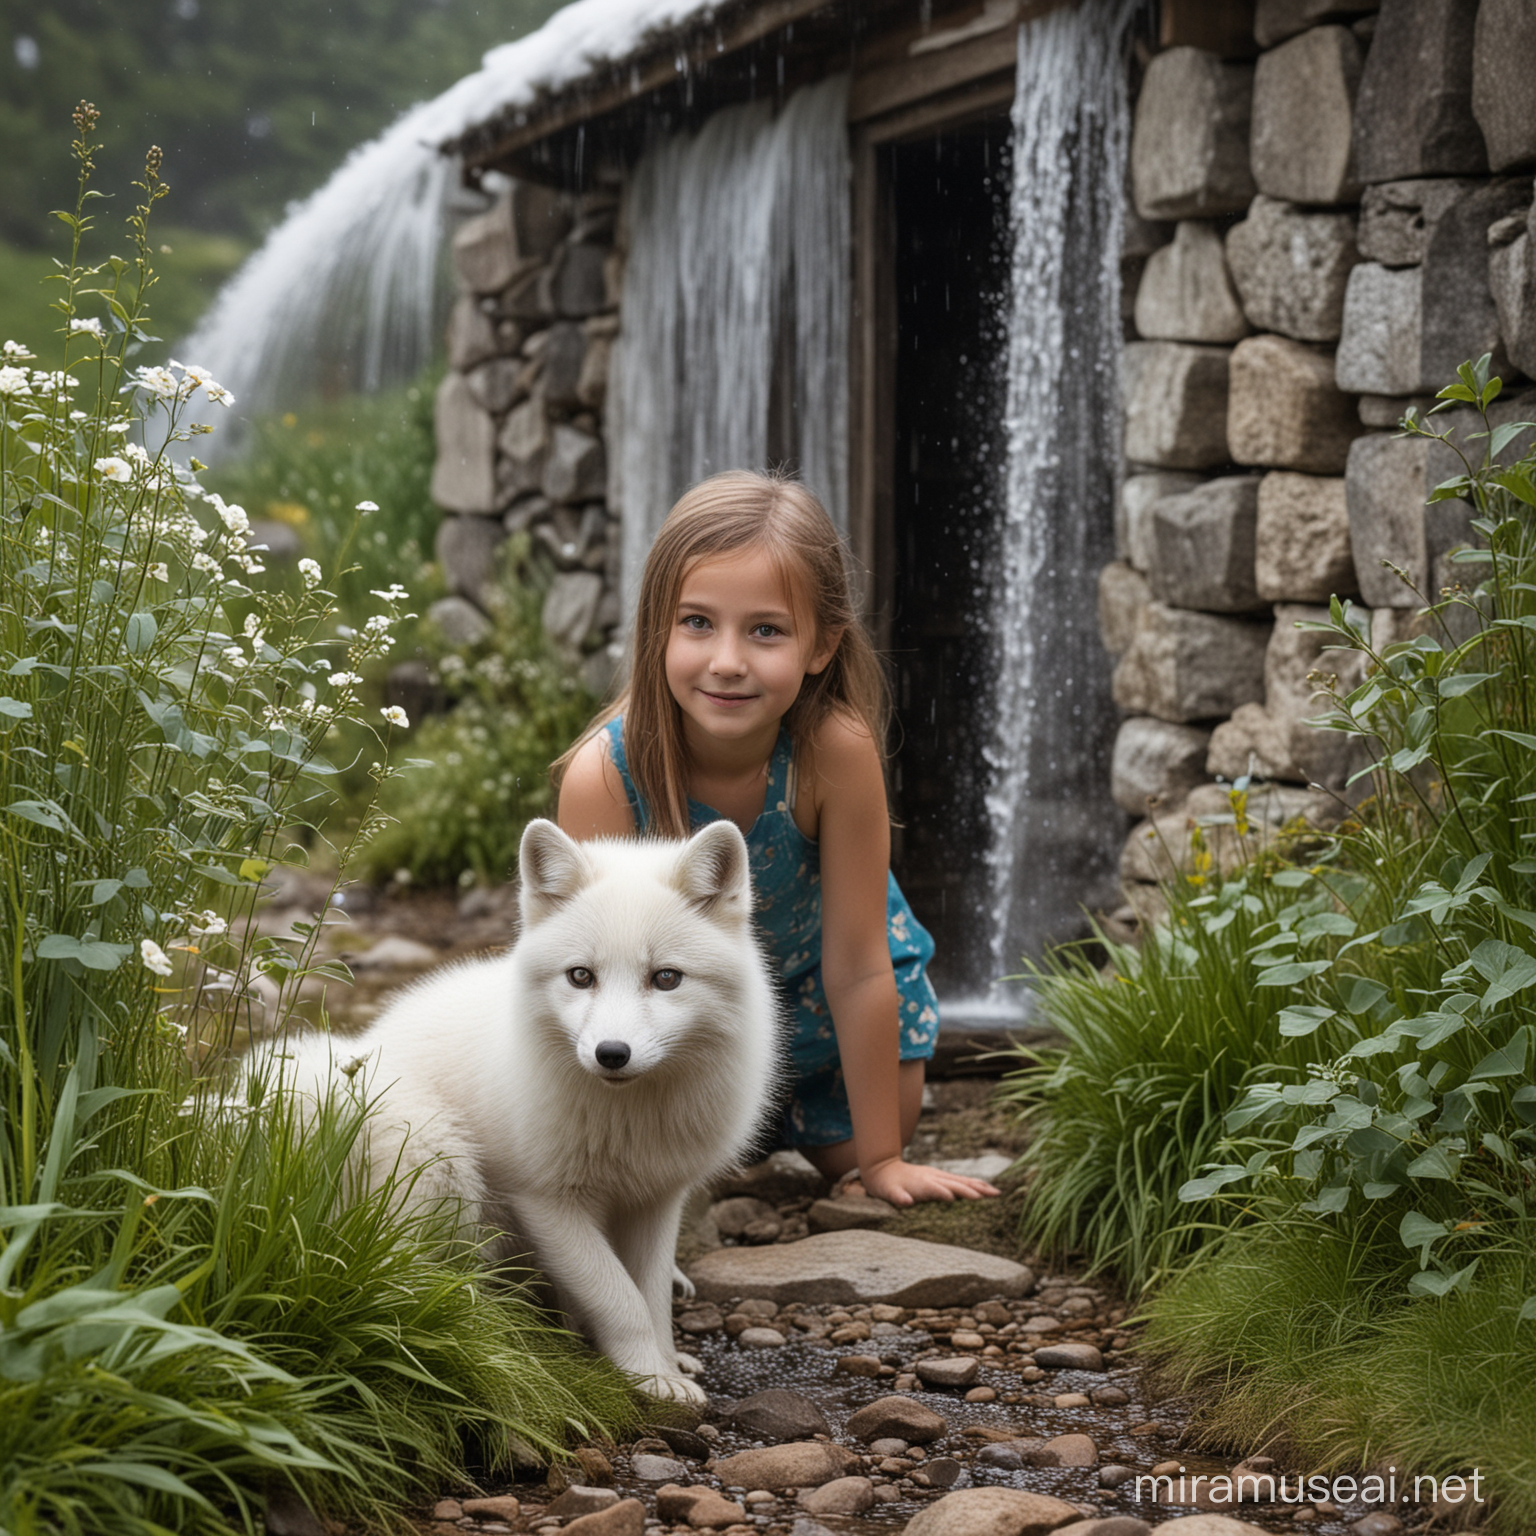 Half Young Girl Half Arctic Fox in Front of a Cottage Behind a Waterfall